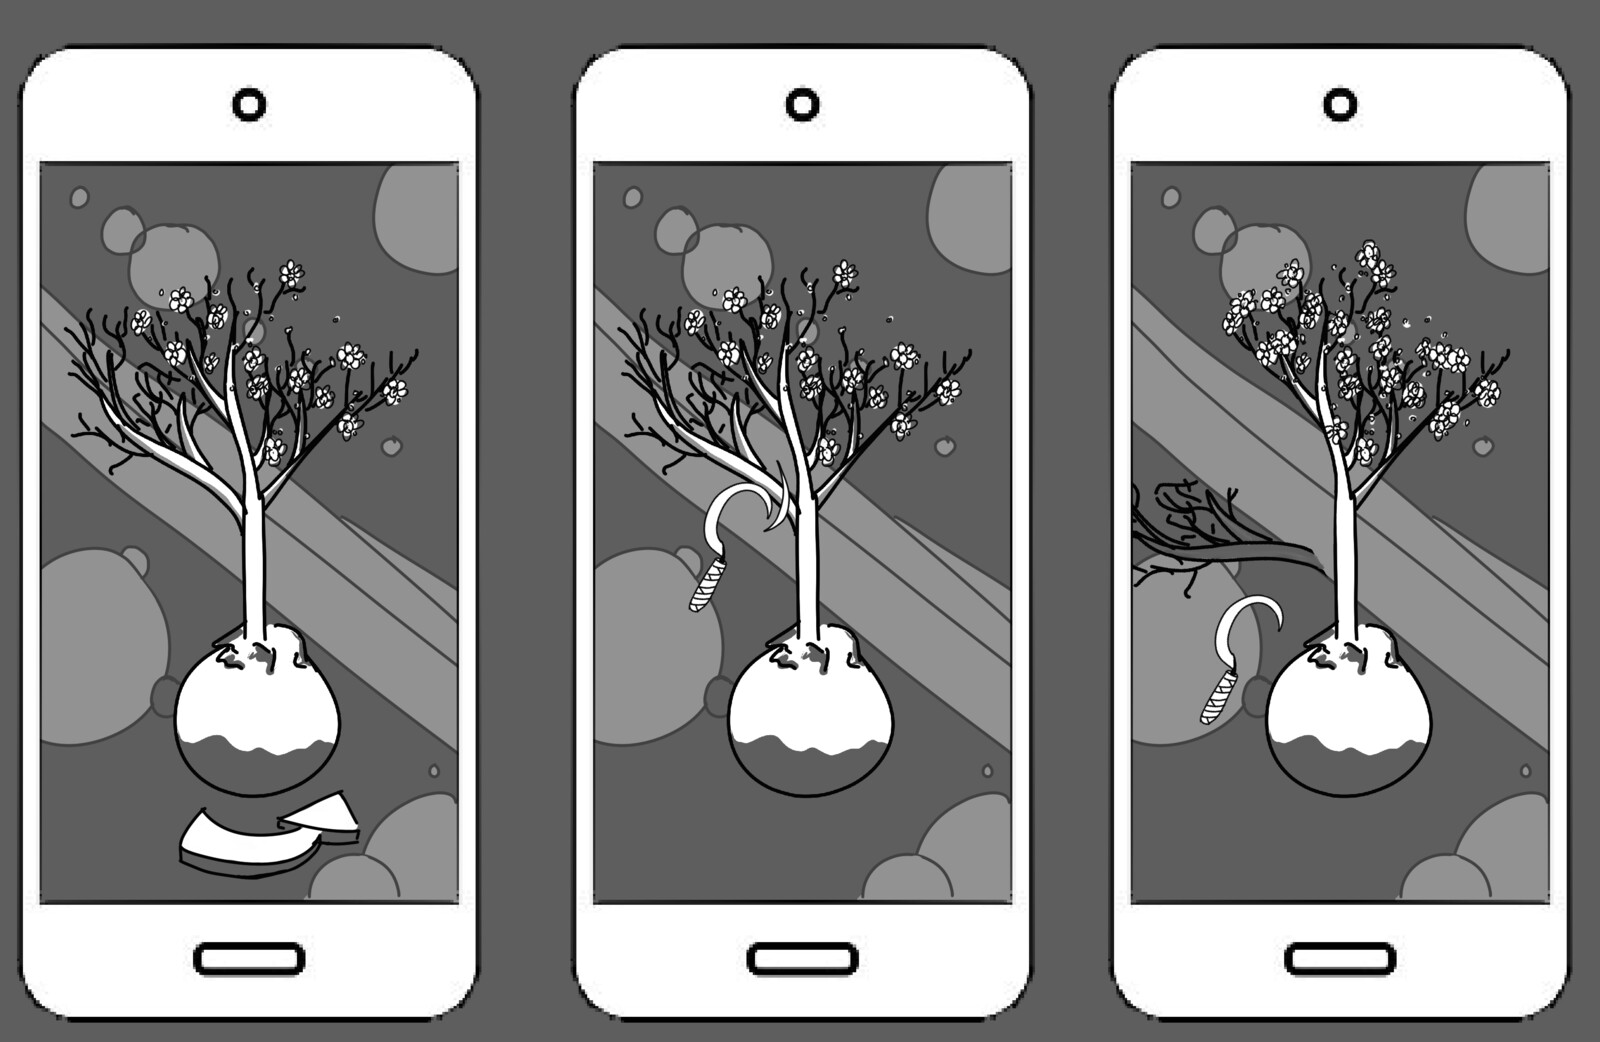 A tree pruning game